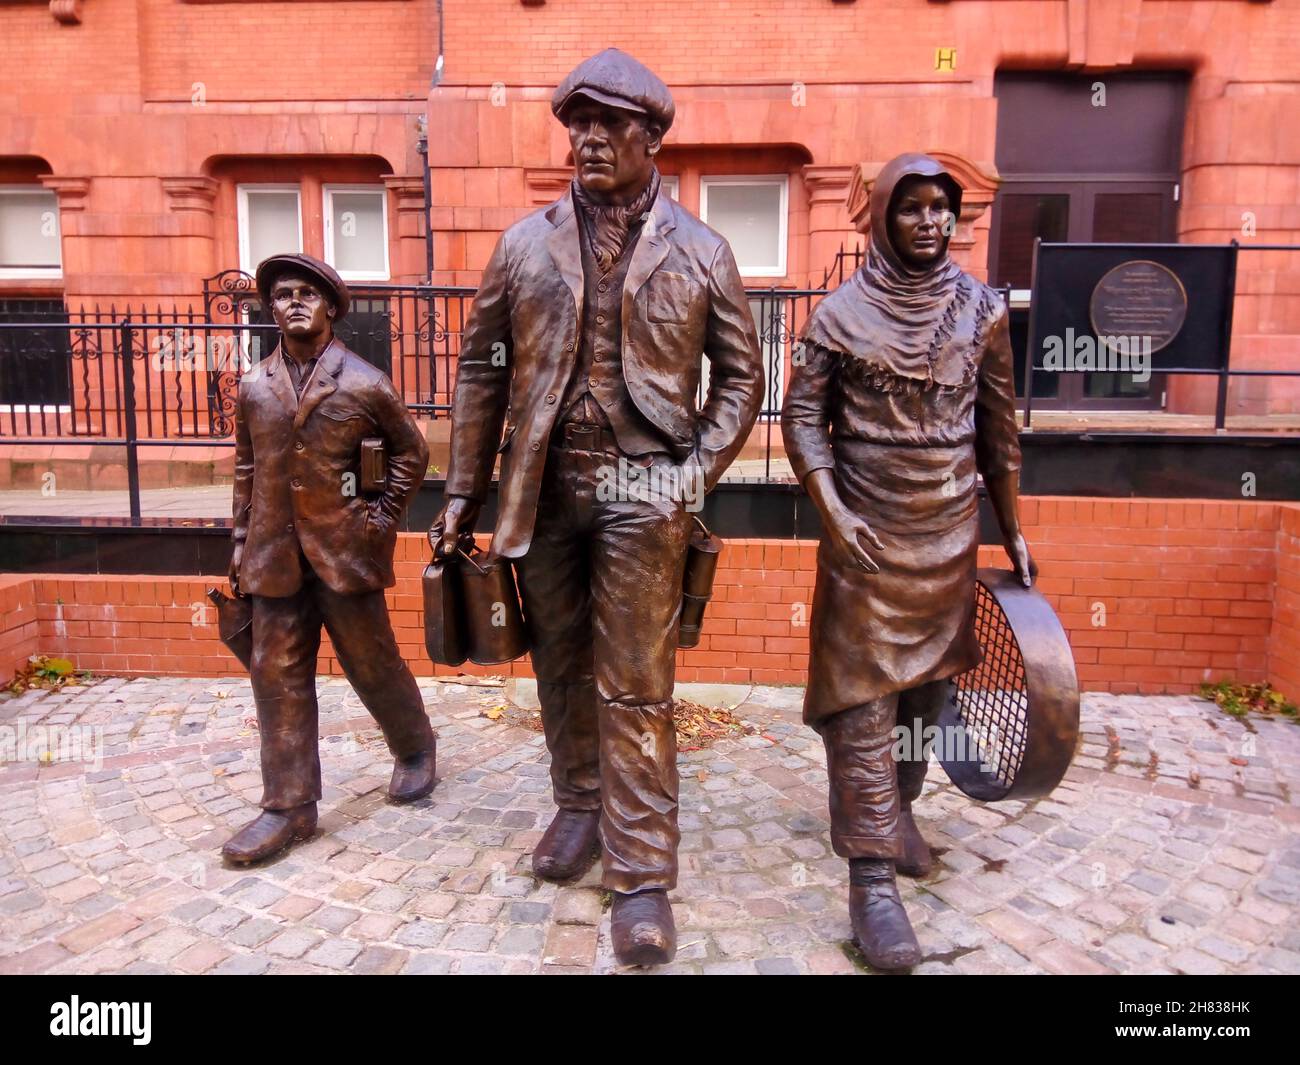 Wigan mining history. statue features a miner, pit brow lass and a child sculptor Steve Winterburn Wigan, UK. Industrial revolution concept Stock Photo